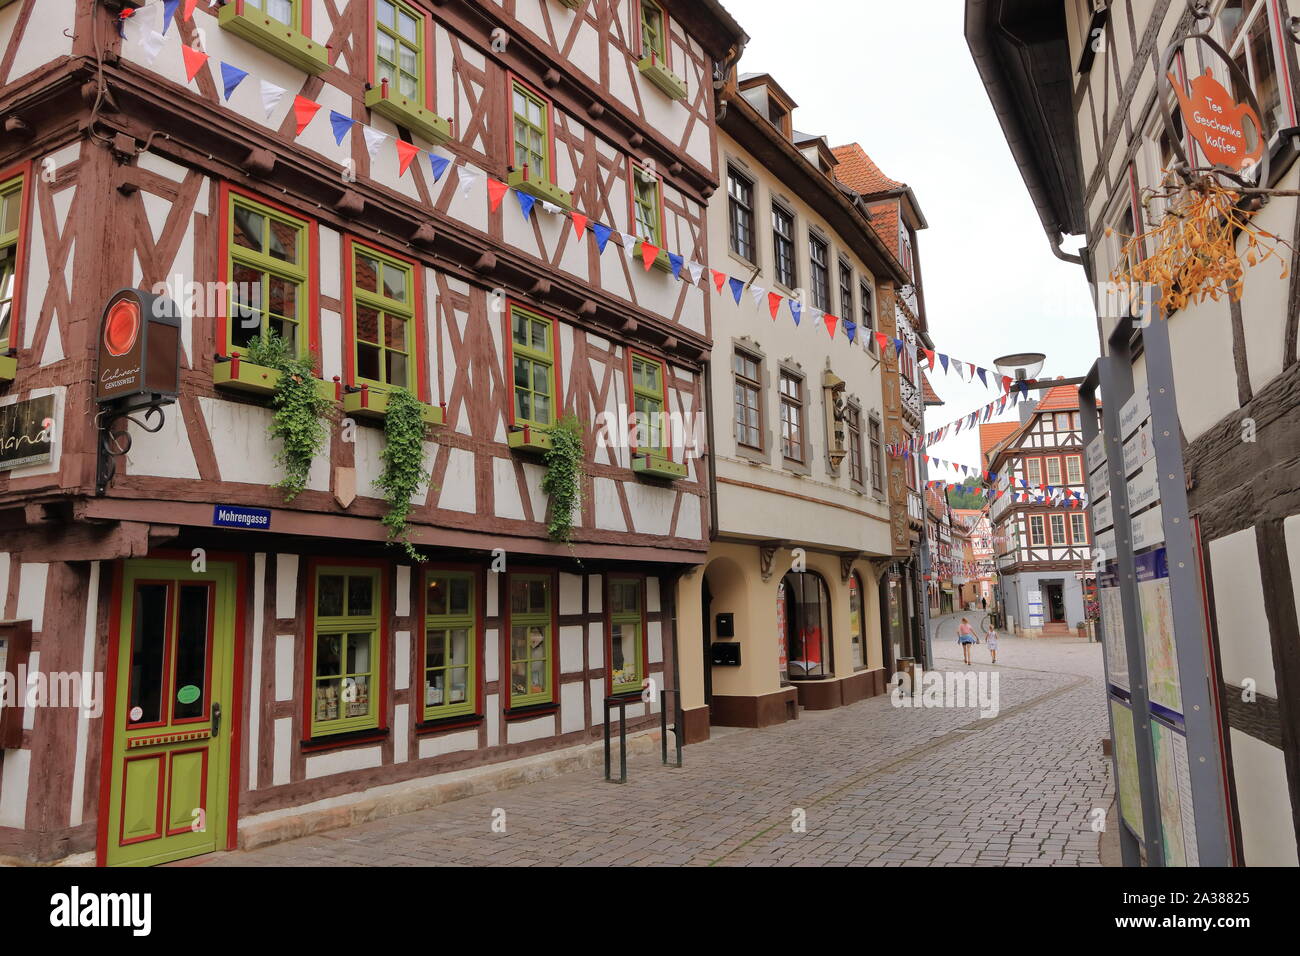 August 8 2019 - Schmalkalden, Thuringia, Germany: Parts of the historical town Stock Photo